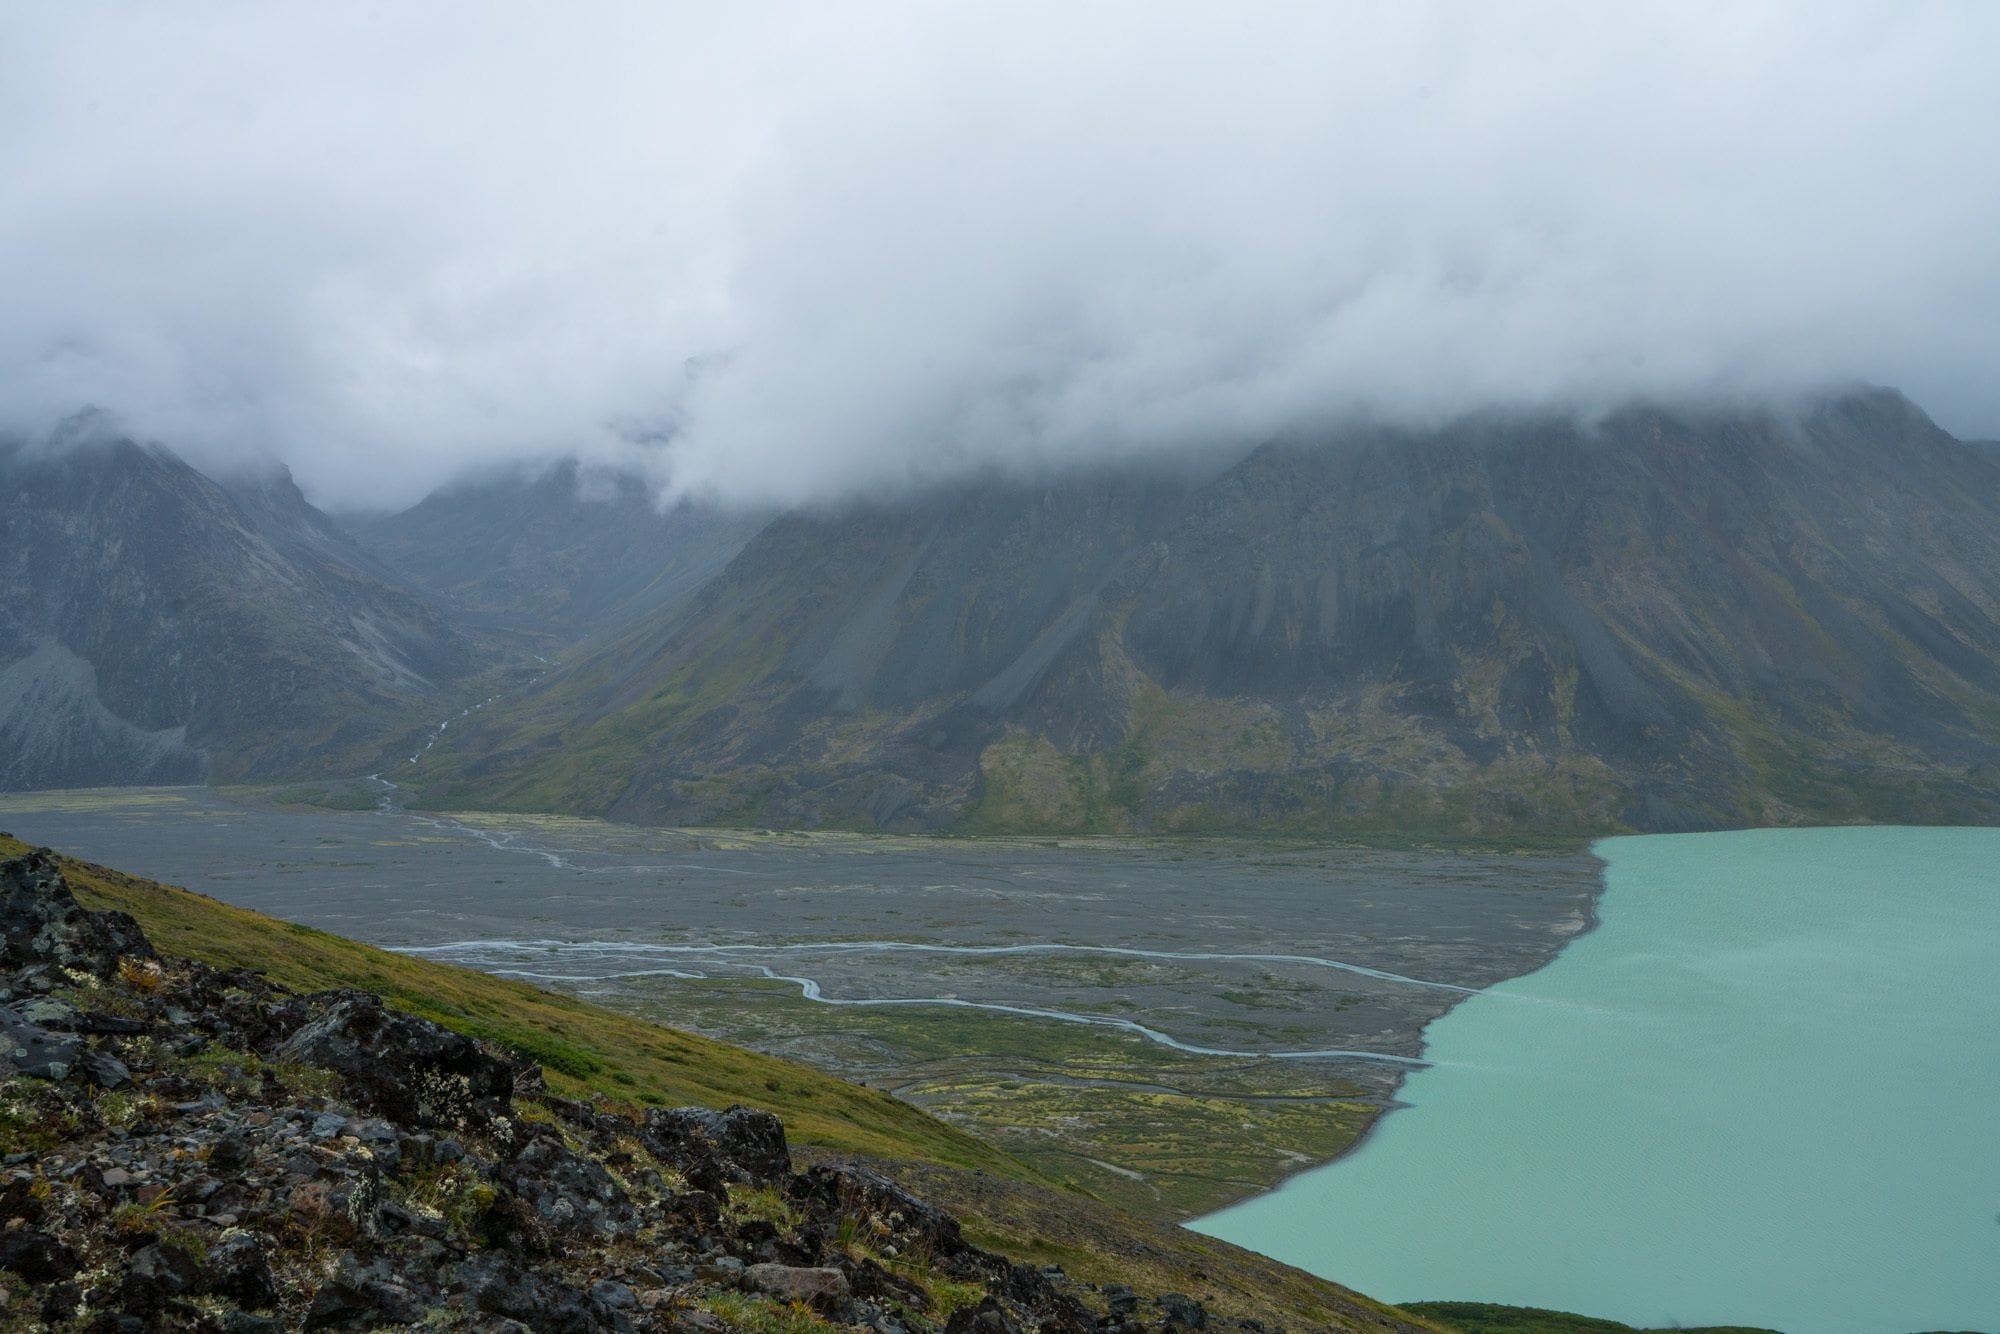 The third Bearfoot Theory group tour is in the books. Explore Lake Clark National Park, one of the most remote parks in the country in this review of my 10-day backpacking trip with Alaska Alpine Adventures.